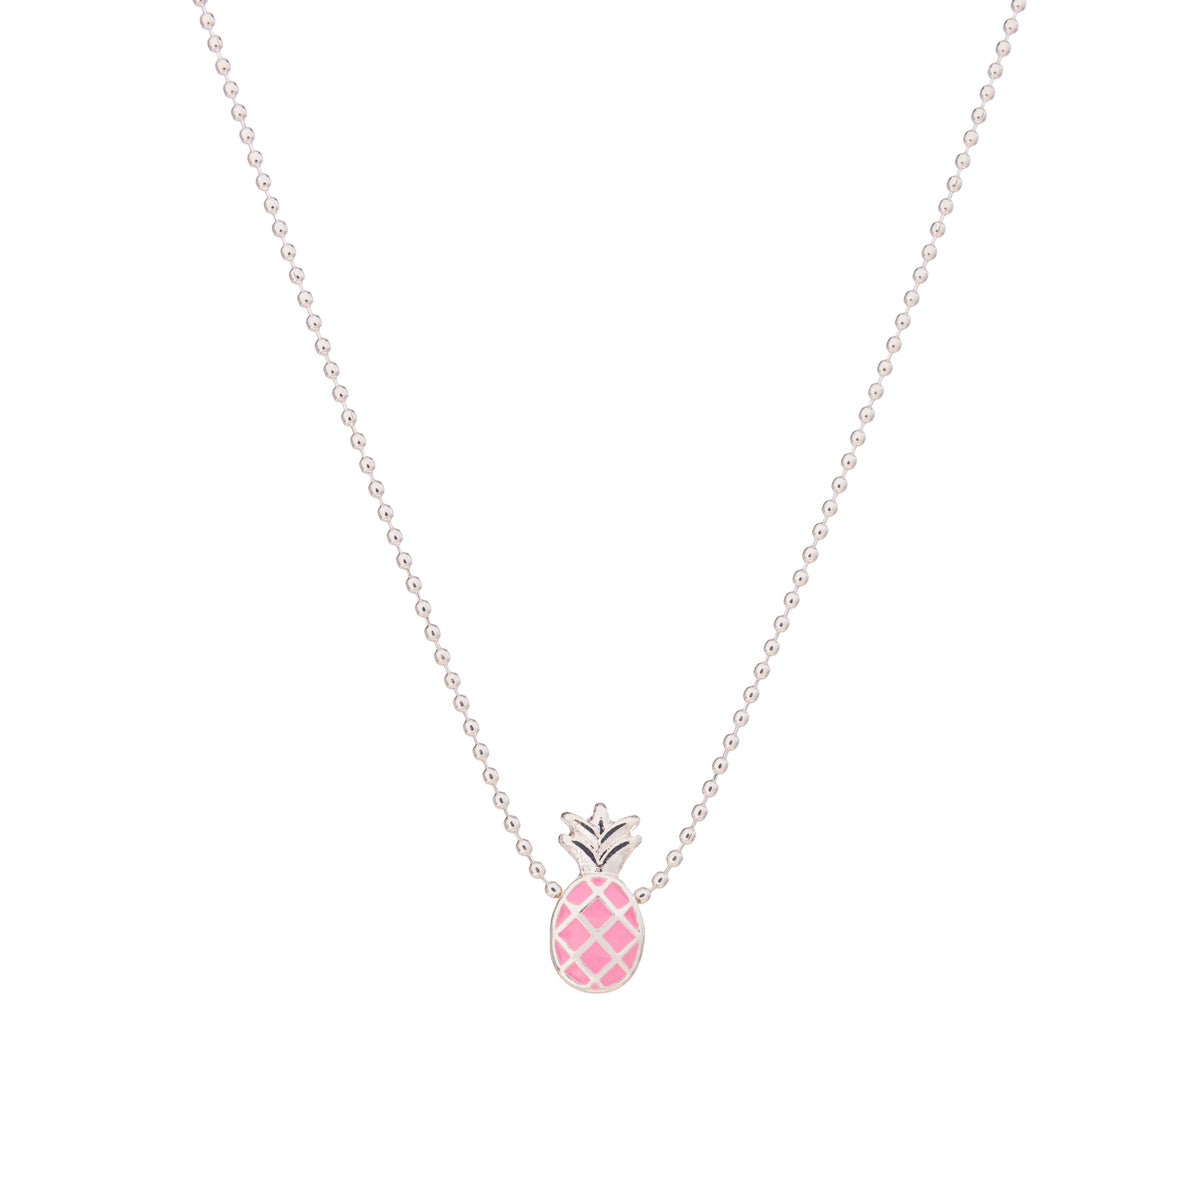 Colorful Enamel Pineapple Ball Chain Necklace